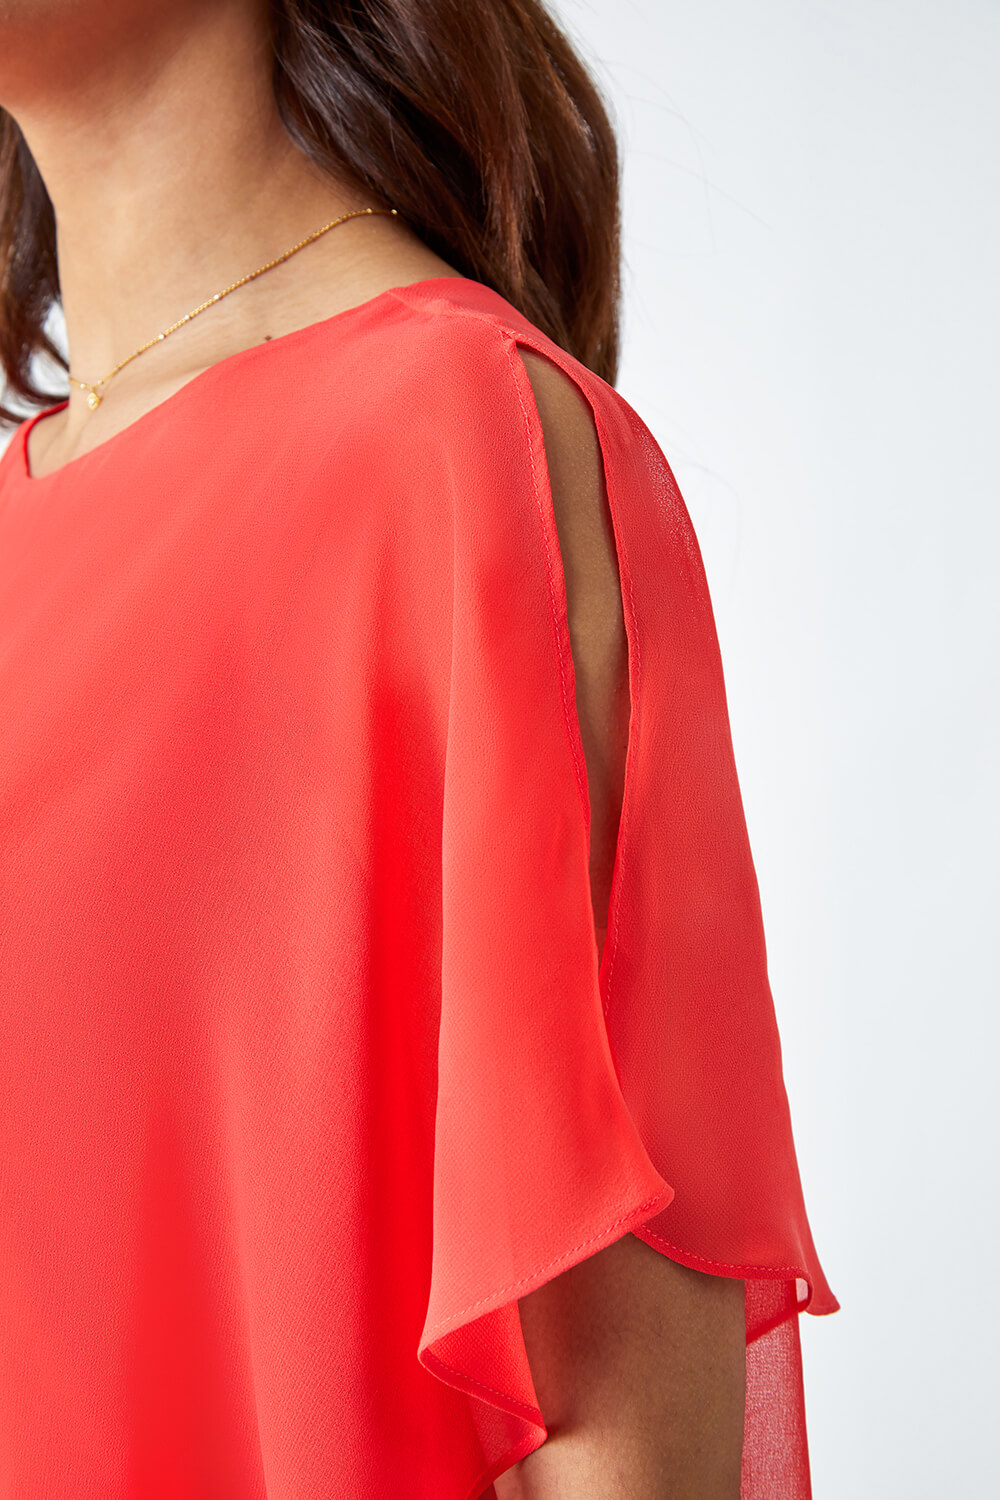 CORAL Asymmetric Cold Shoulder Stretch Top, Image 5 of 5